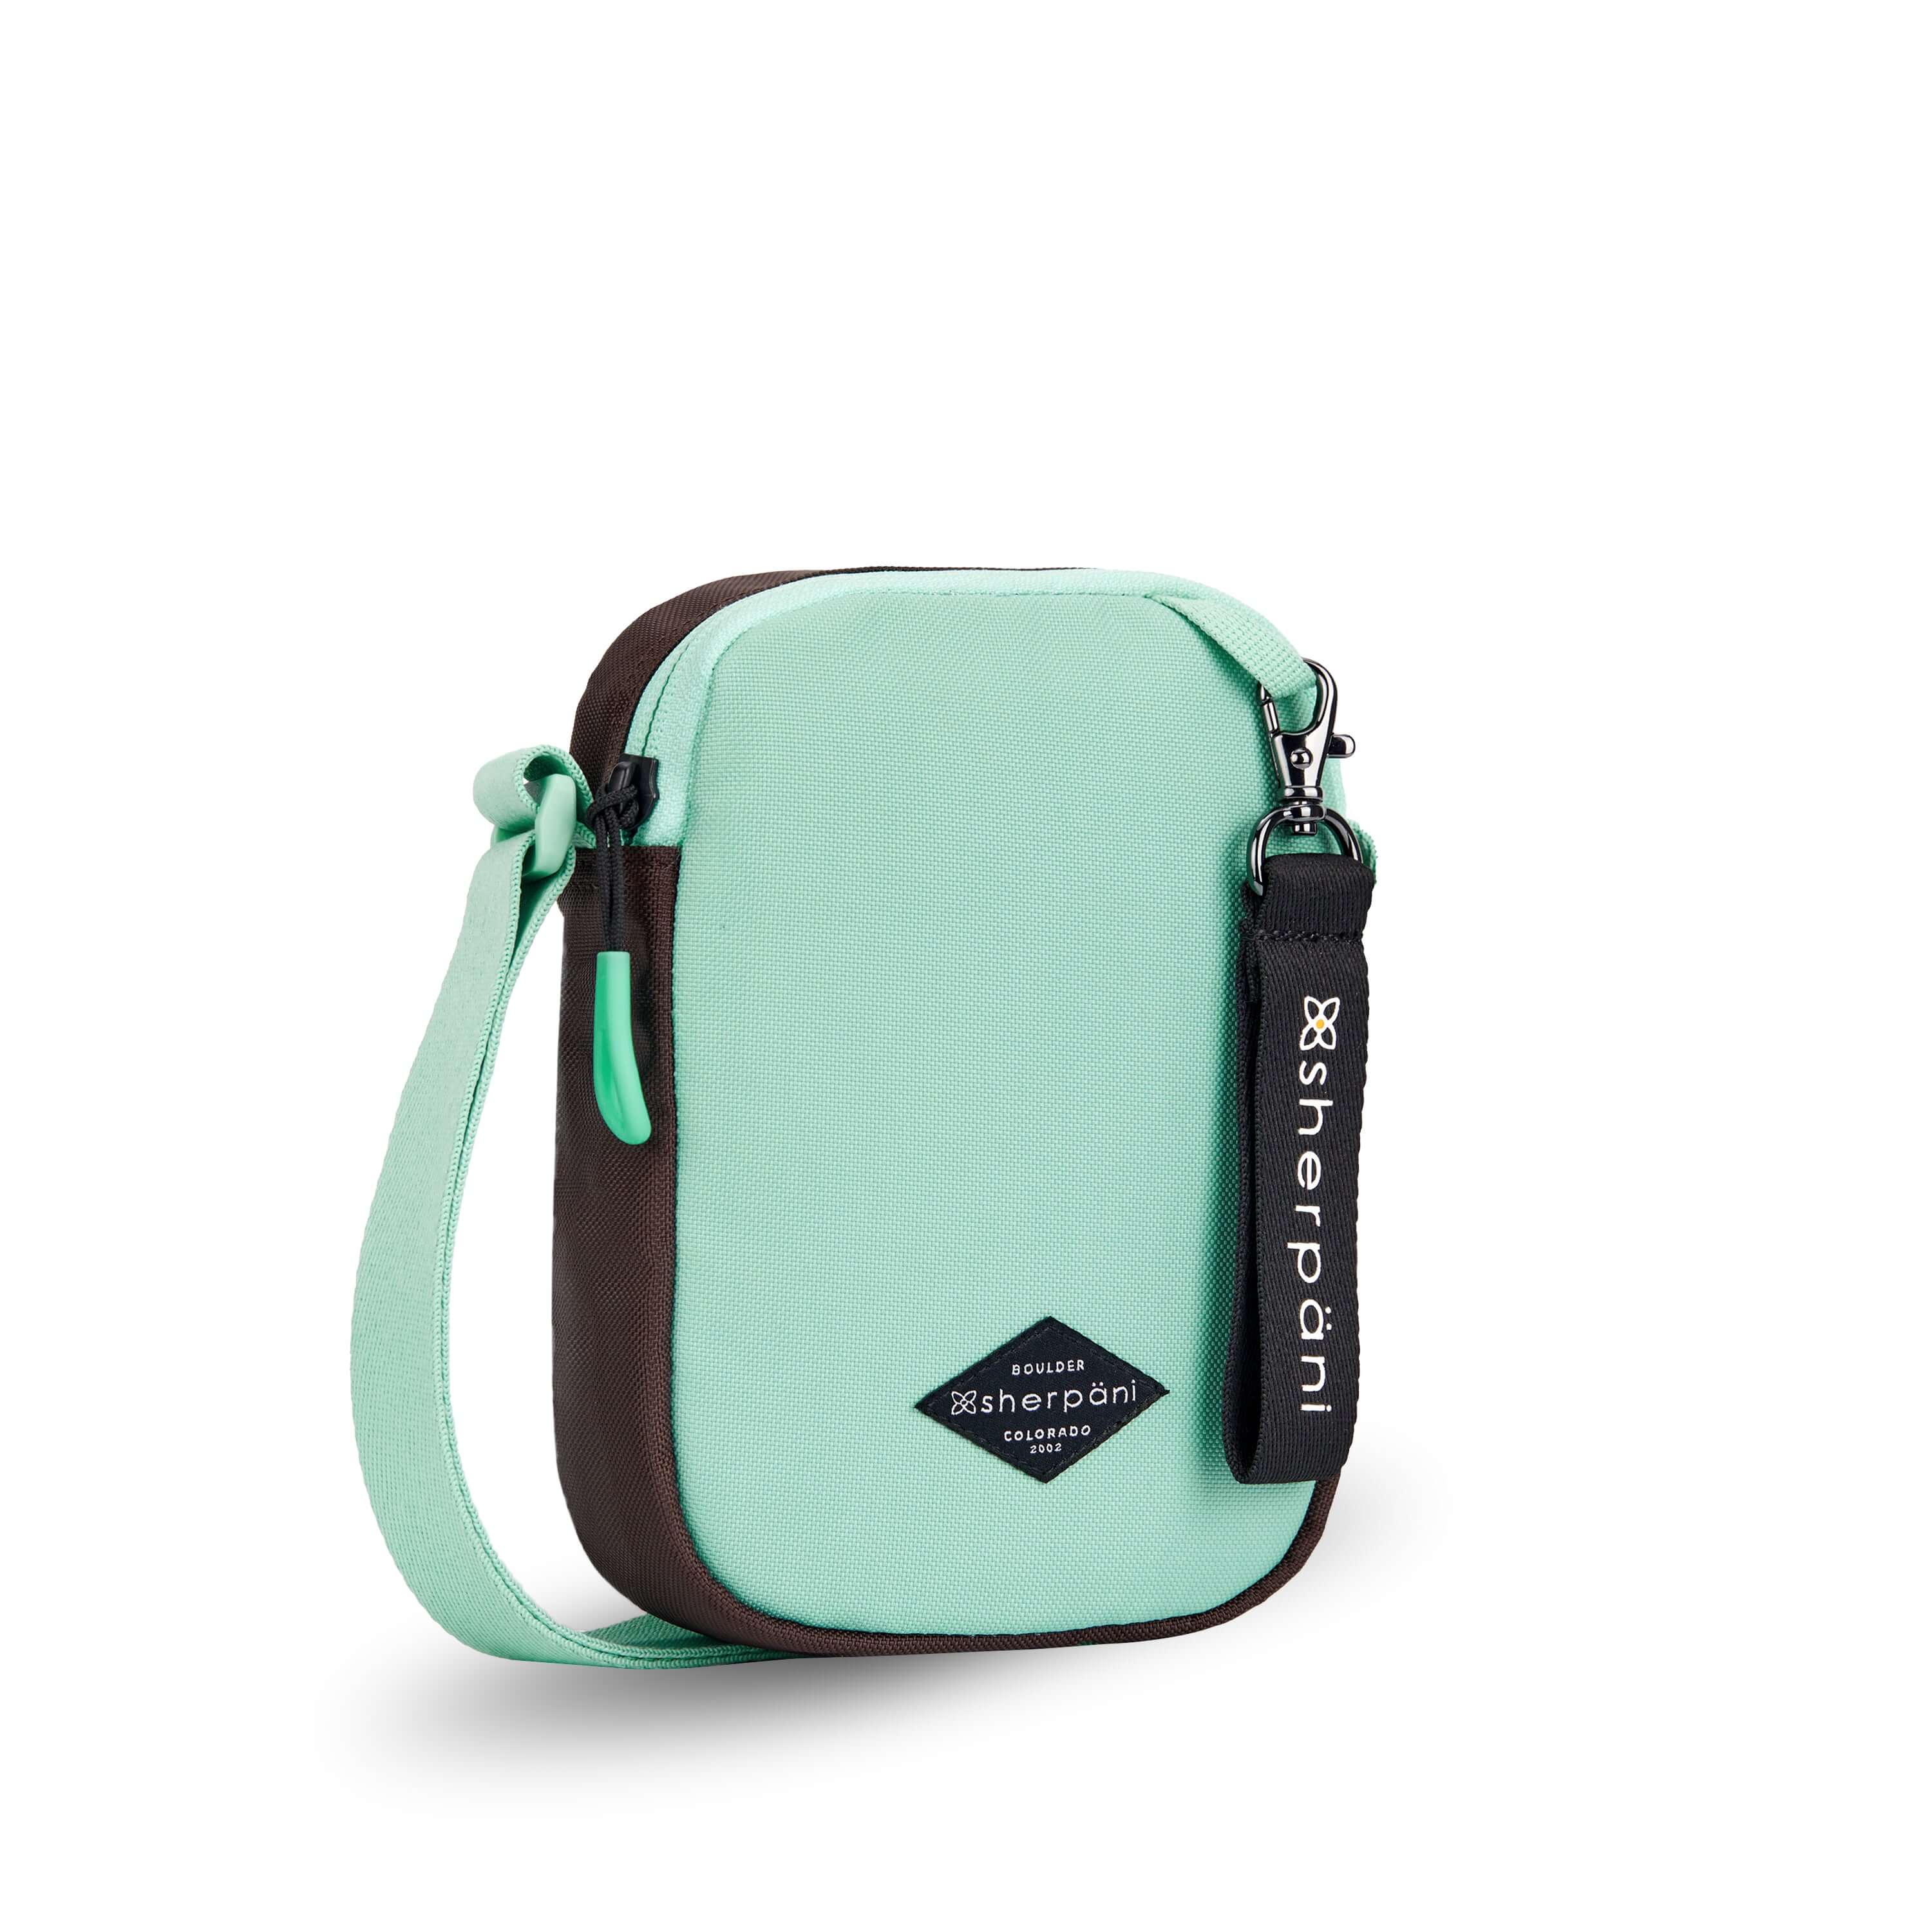 Angled front view of Sherpani crossbody, the Rogue in Seagreen. The bag is two toned: the front is light green and the back is brown. The main zipper compartment features an easy-pull zipper accented in light green. The bag has an adjustable crossbody strap. A branded Sherpani keychain is clipped to a fabric loop on the top right corner. #color_seagreen